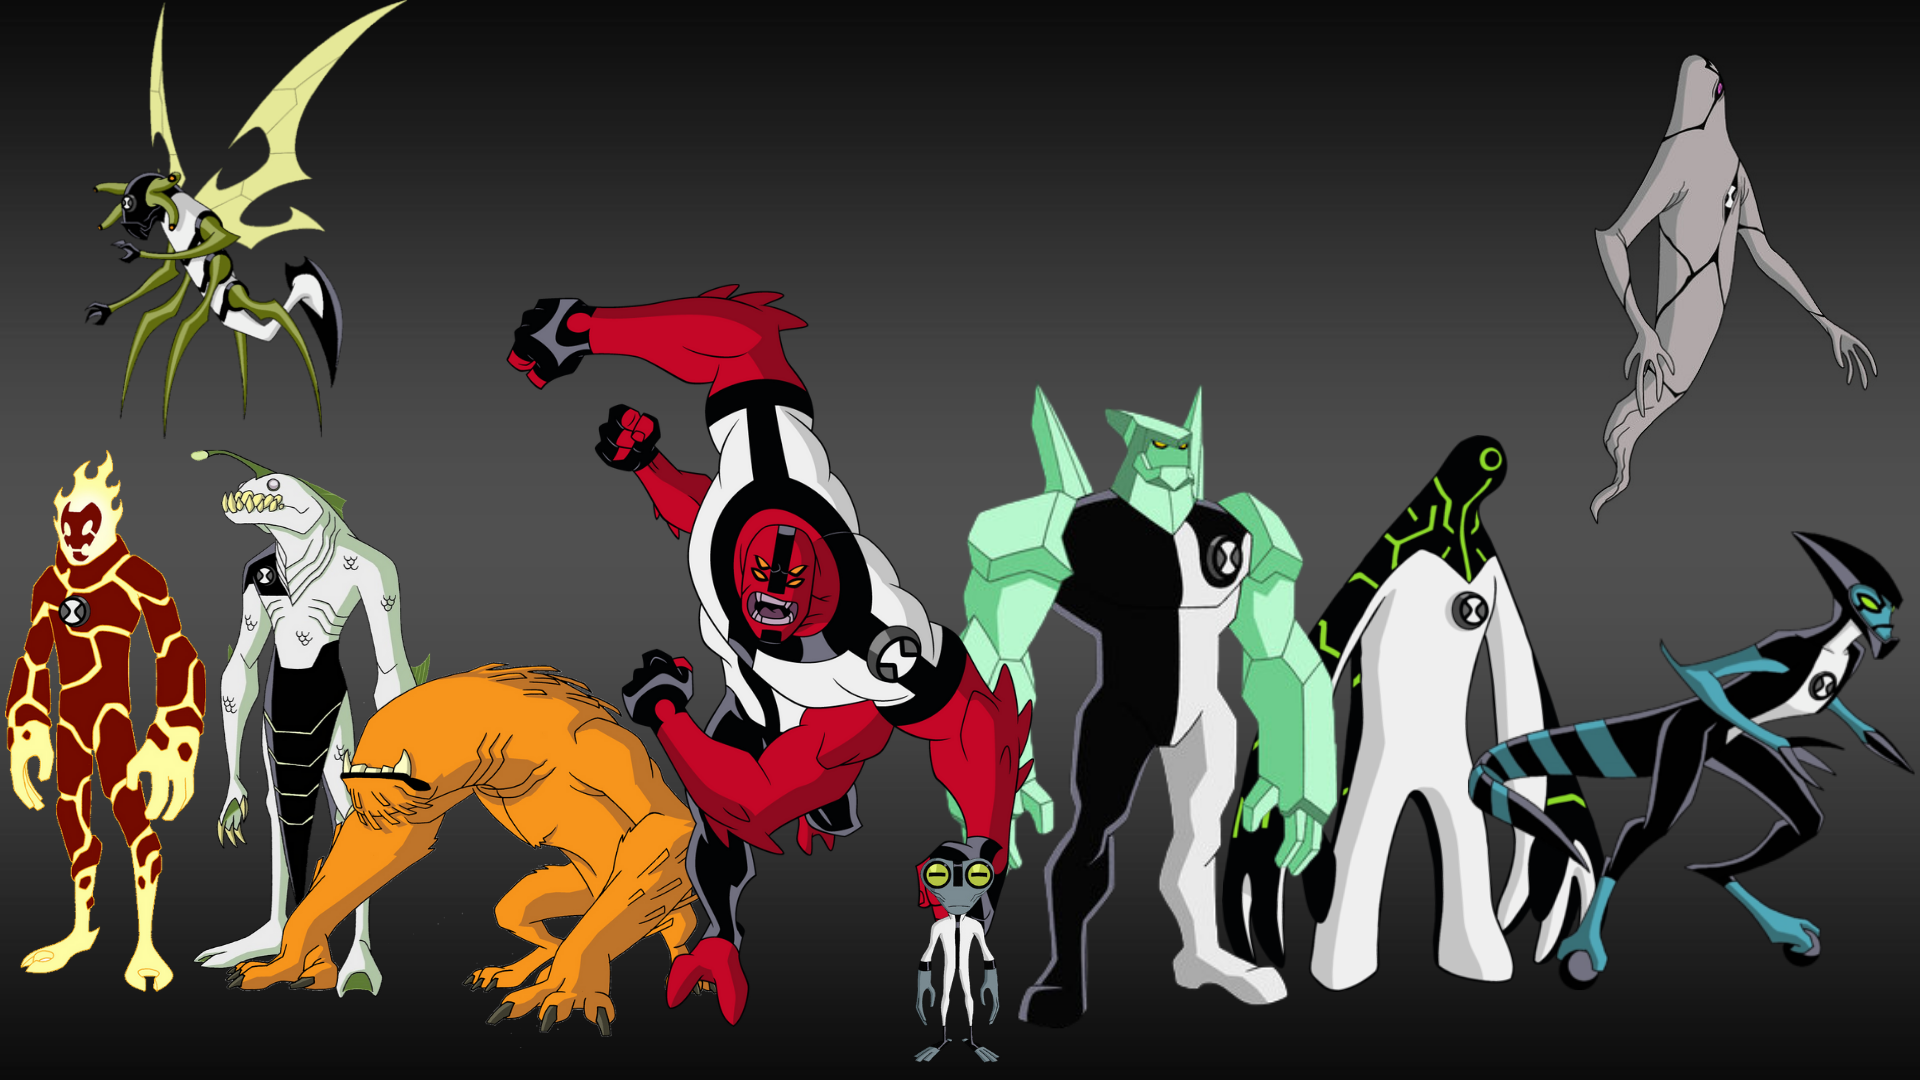 I made a Ben 10 Classic Wallpaper (1920x1080). I couldn't find a high quality picture for Diamond Head